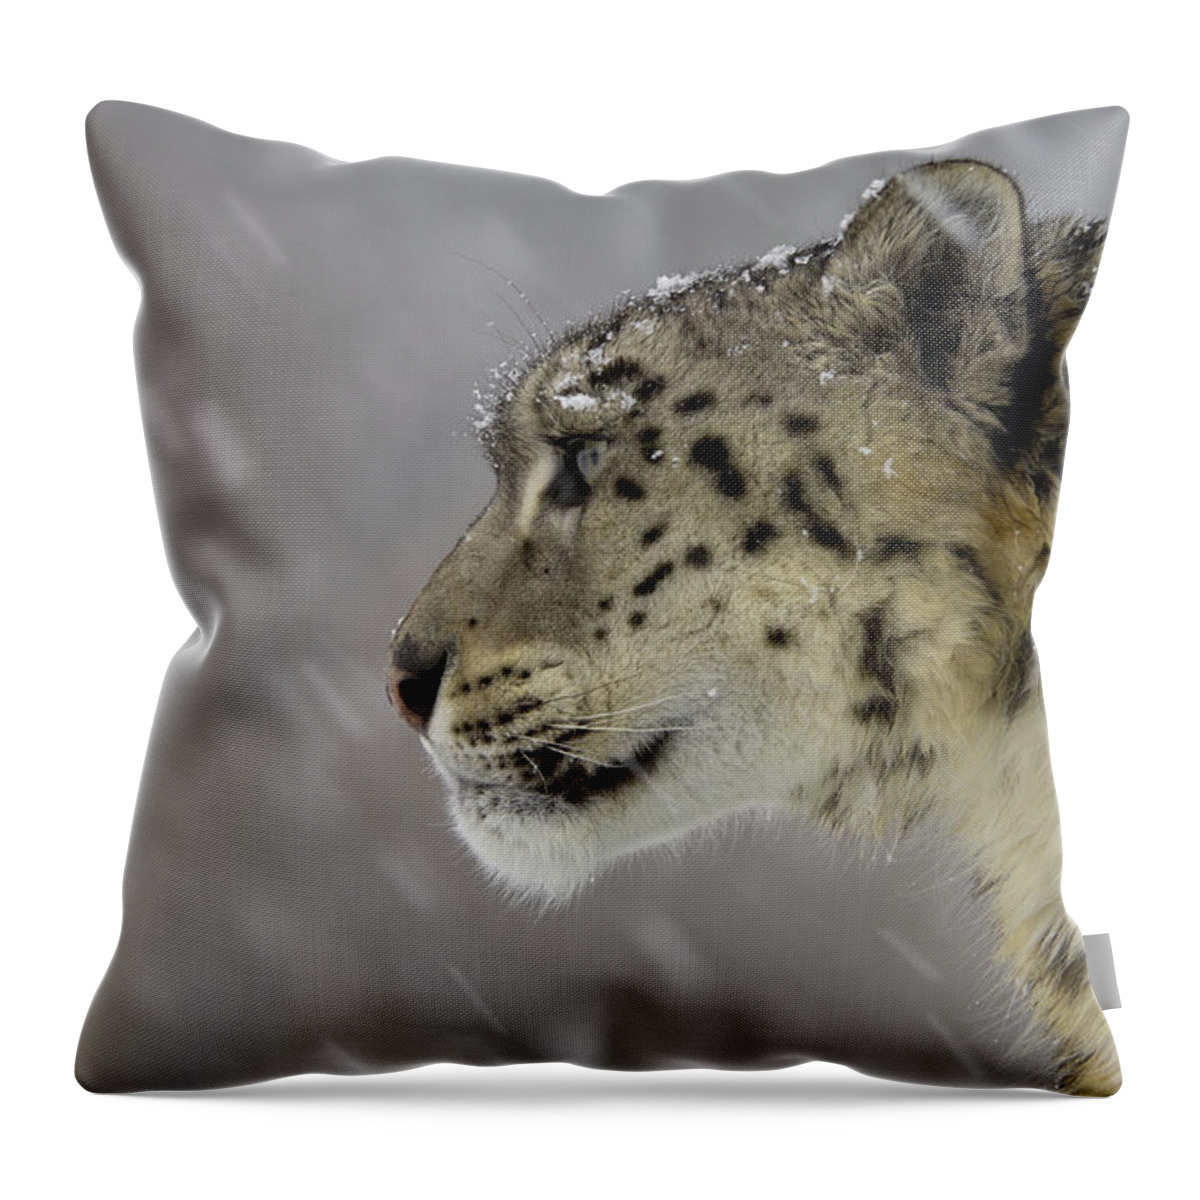 Flpa Throw Pillow featuring the photograph Snow Leopard In Snowfall by Malcolm Schuyl